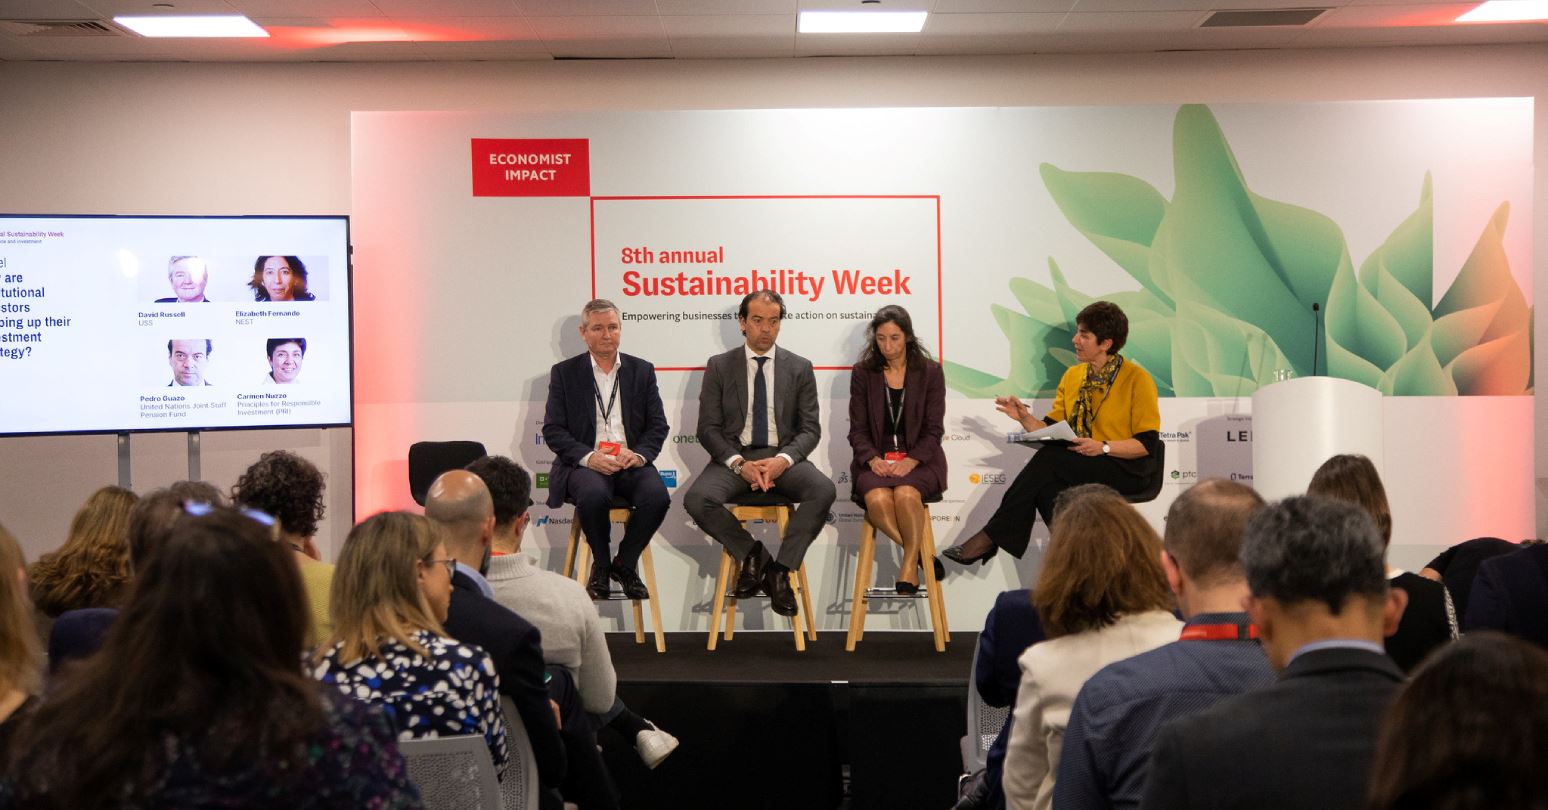 Student Reflections from the Economist's Sustainability Week